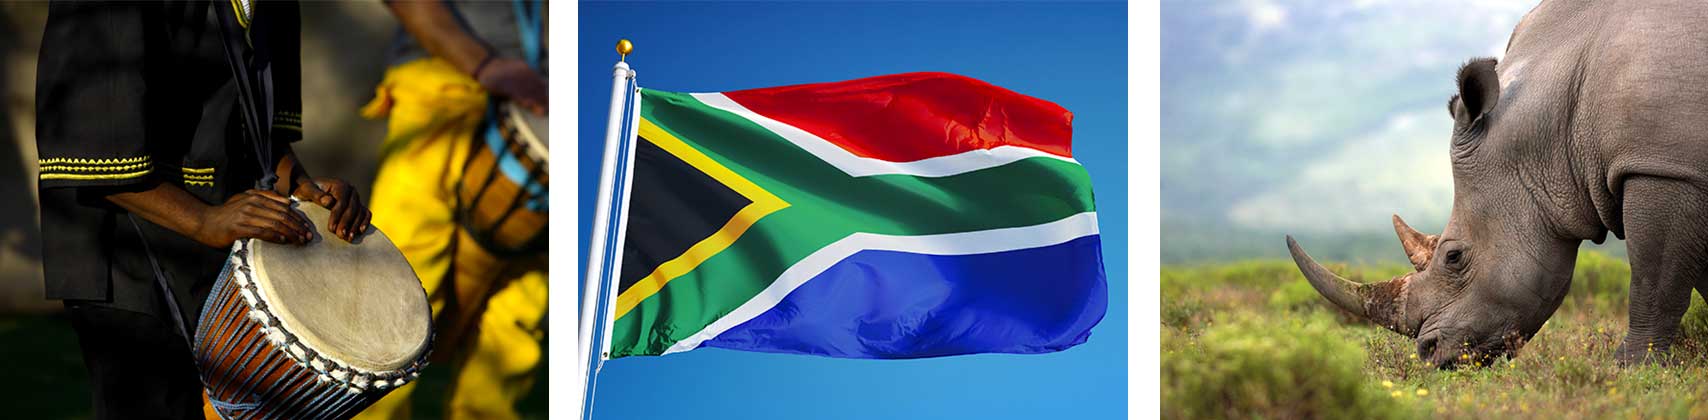 General information about South Africa